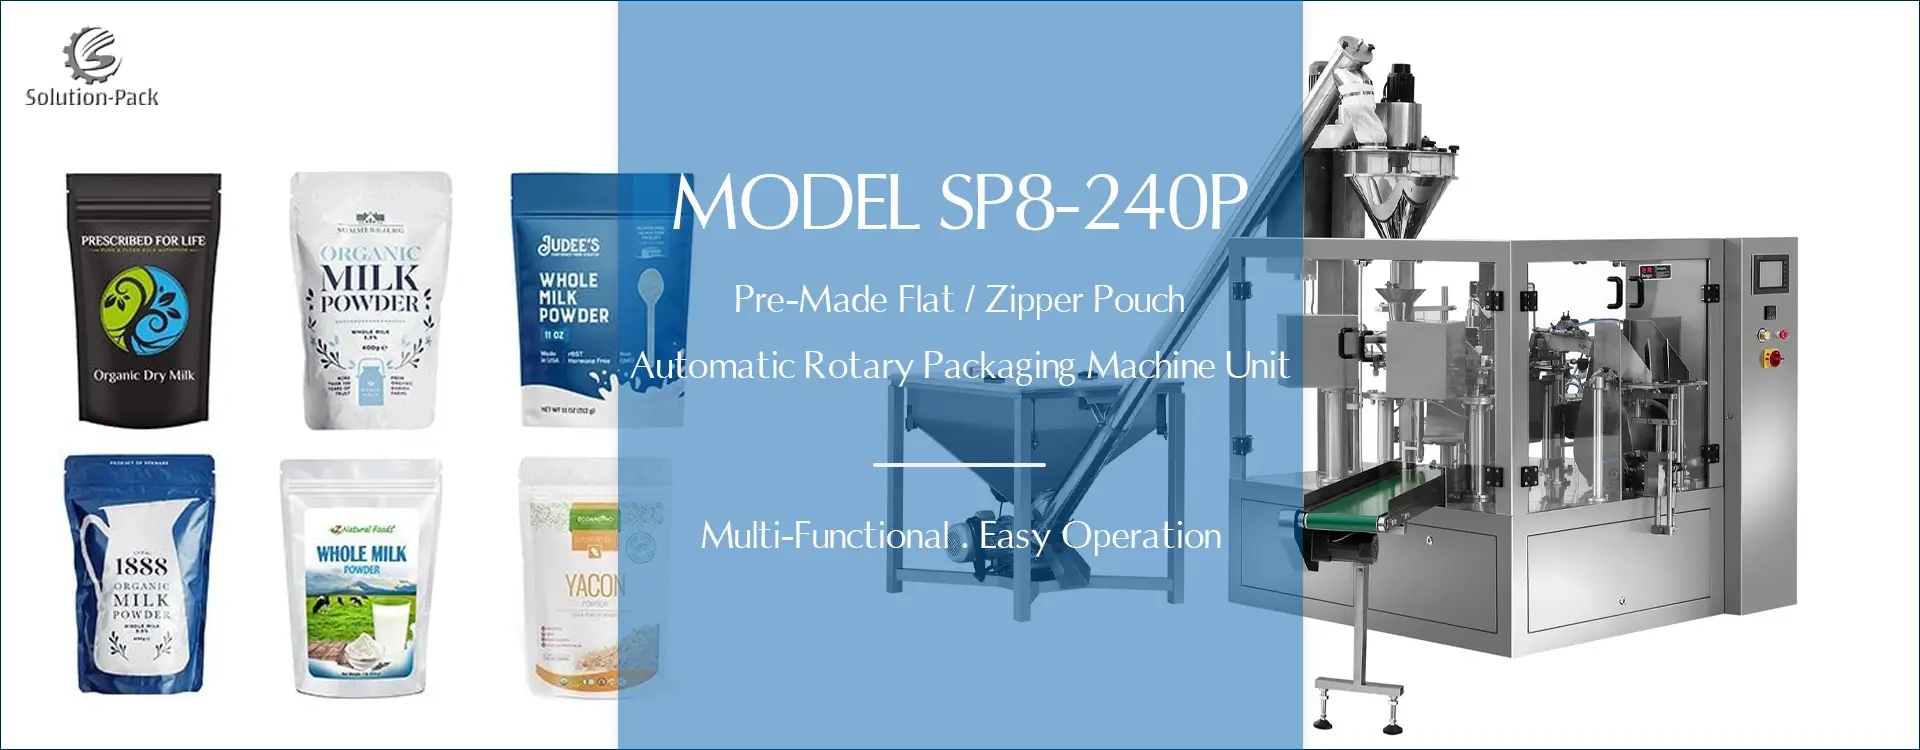 Model SP8-240P Automatic Powder Rotary Packaging Machine Solution Heading Banner Picture | Solution-Pack